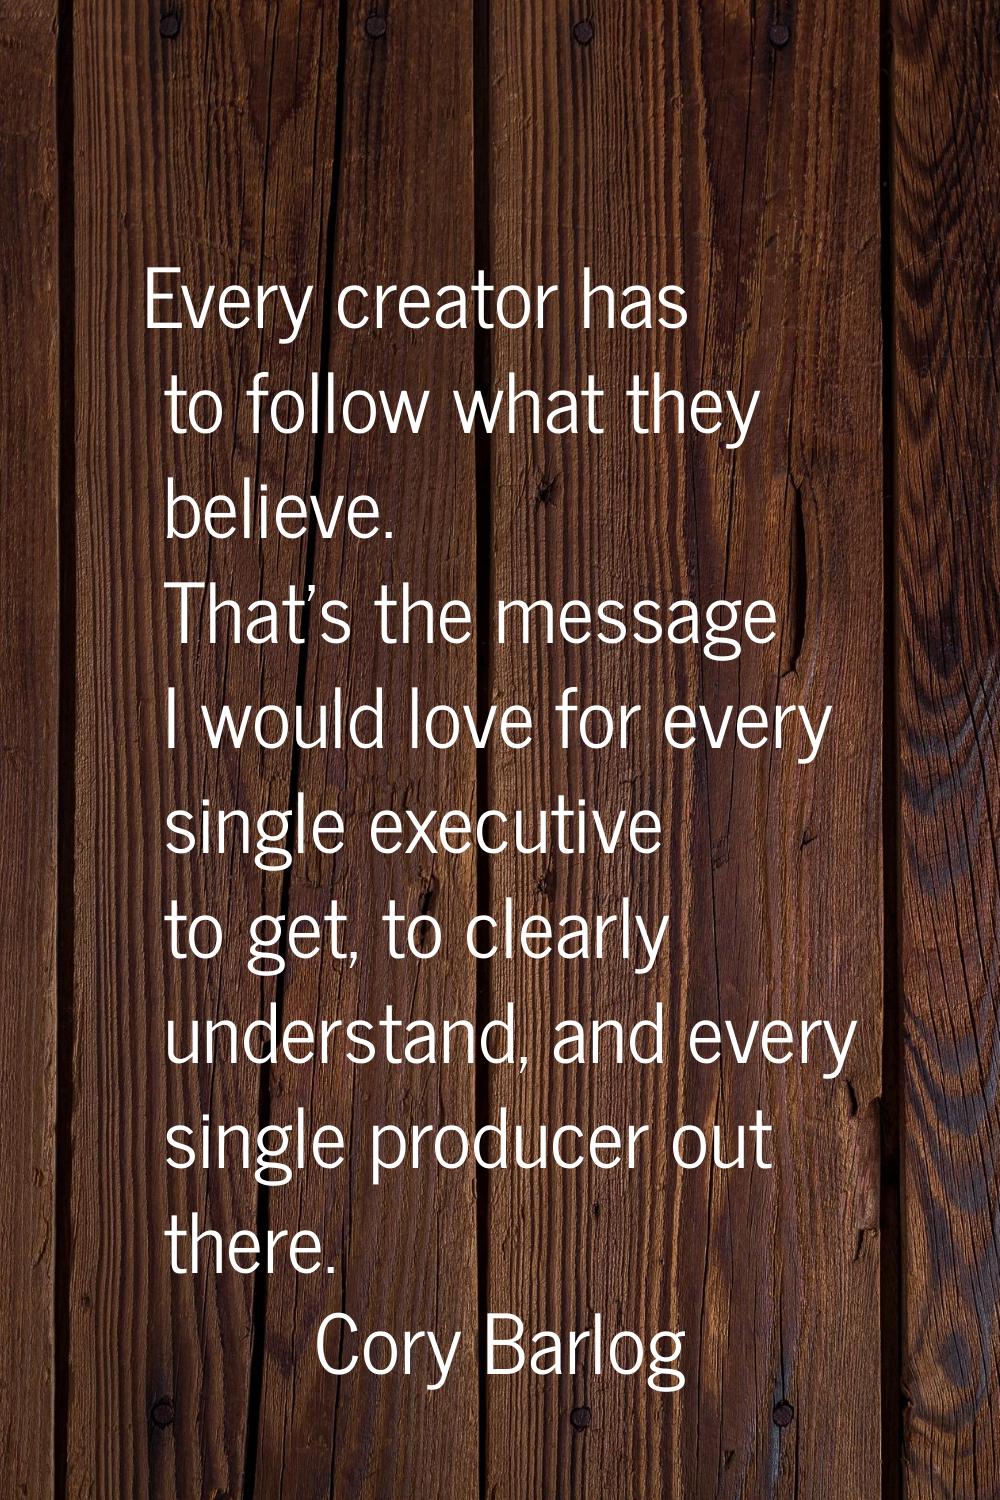 Every creator has to follow what they believe. That's the message I would love for every single exe